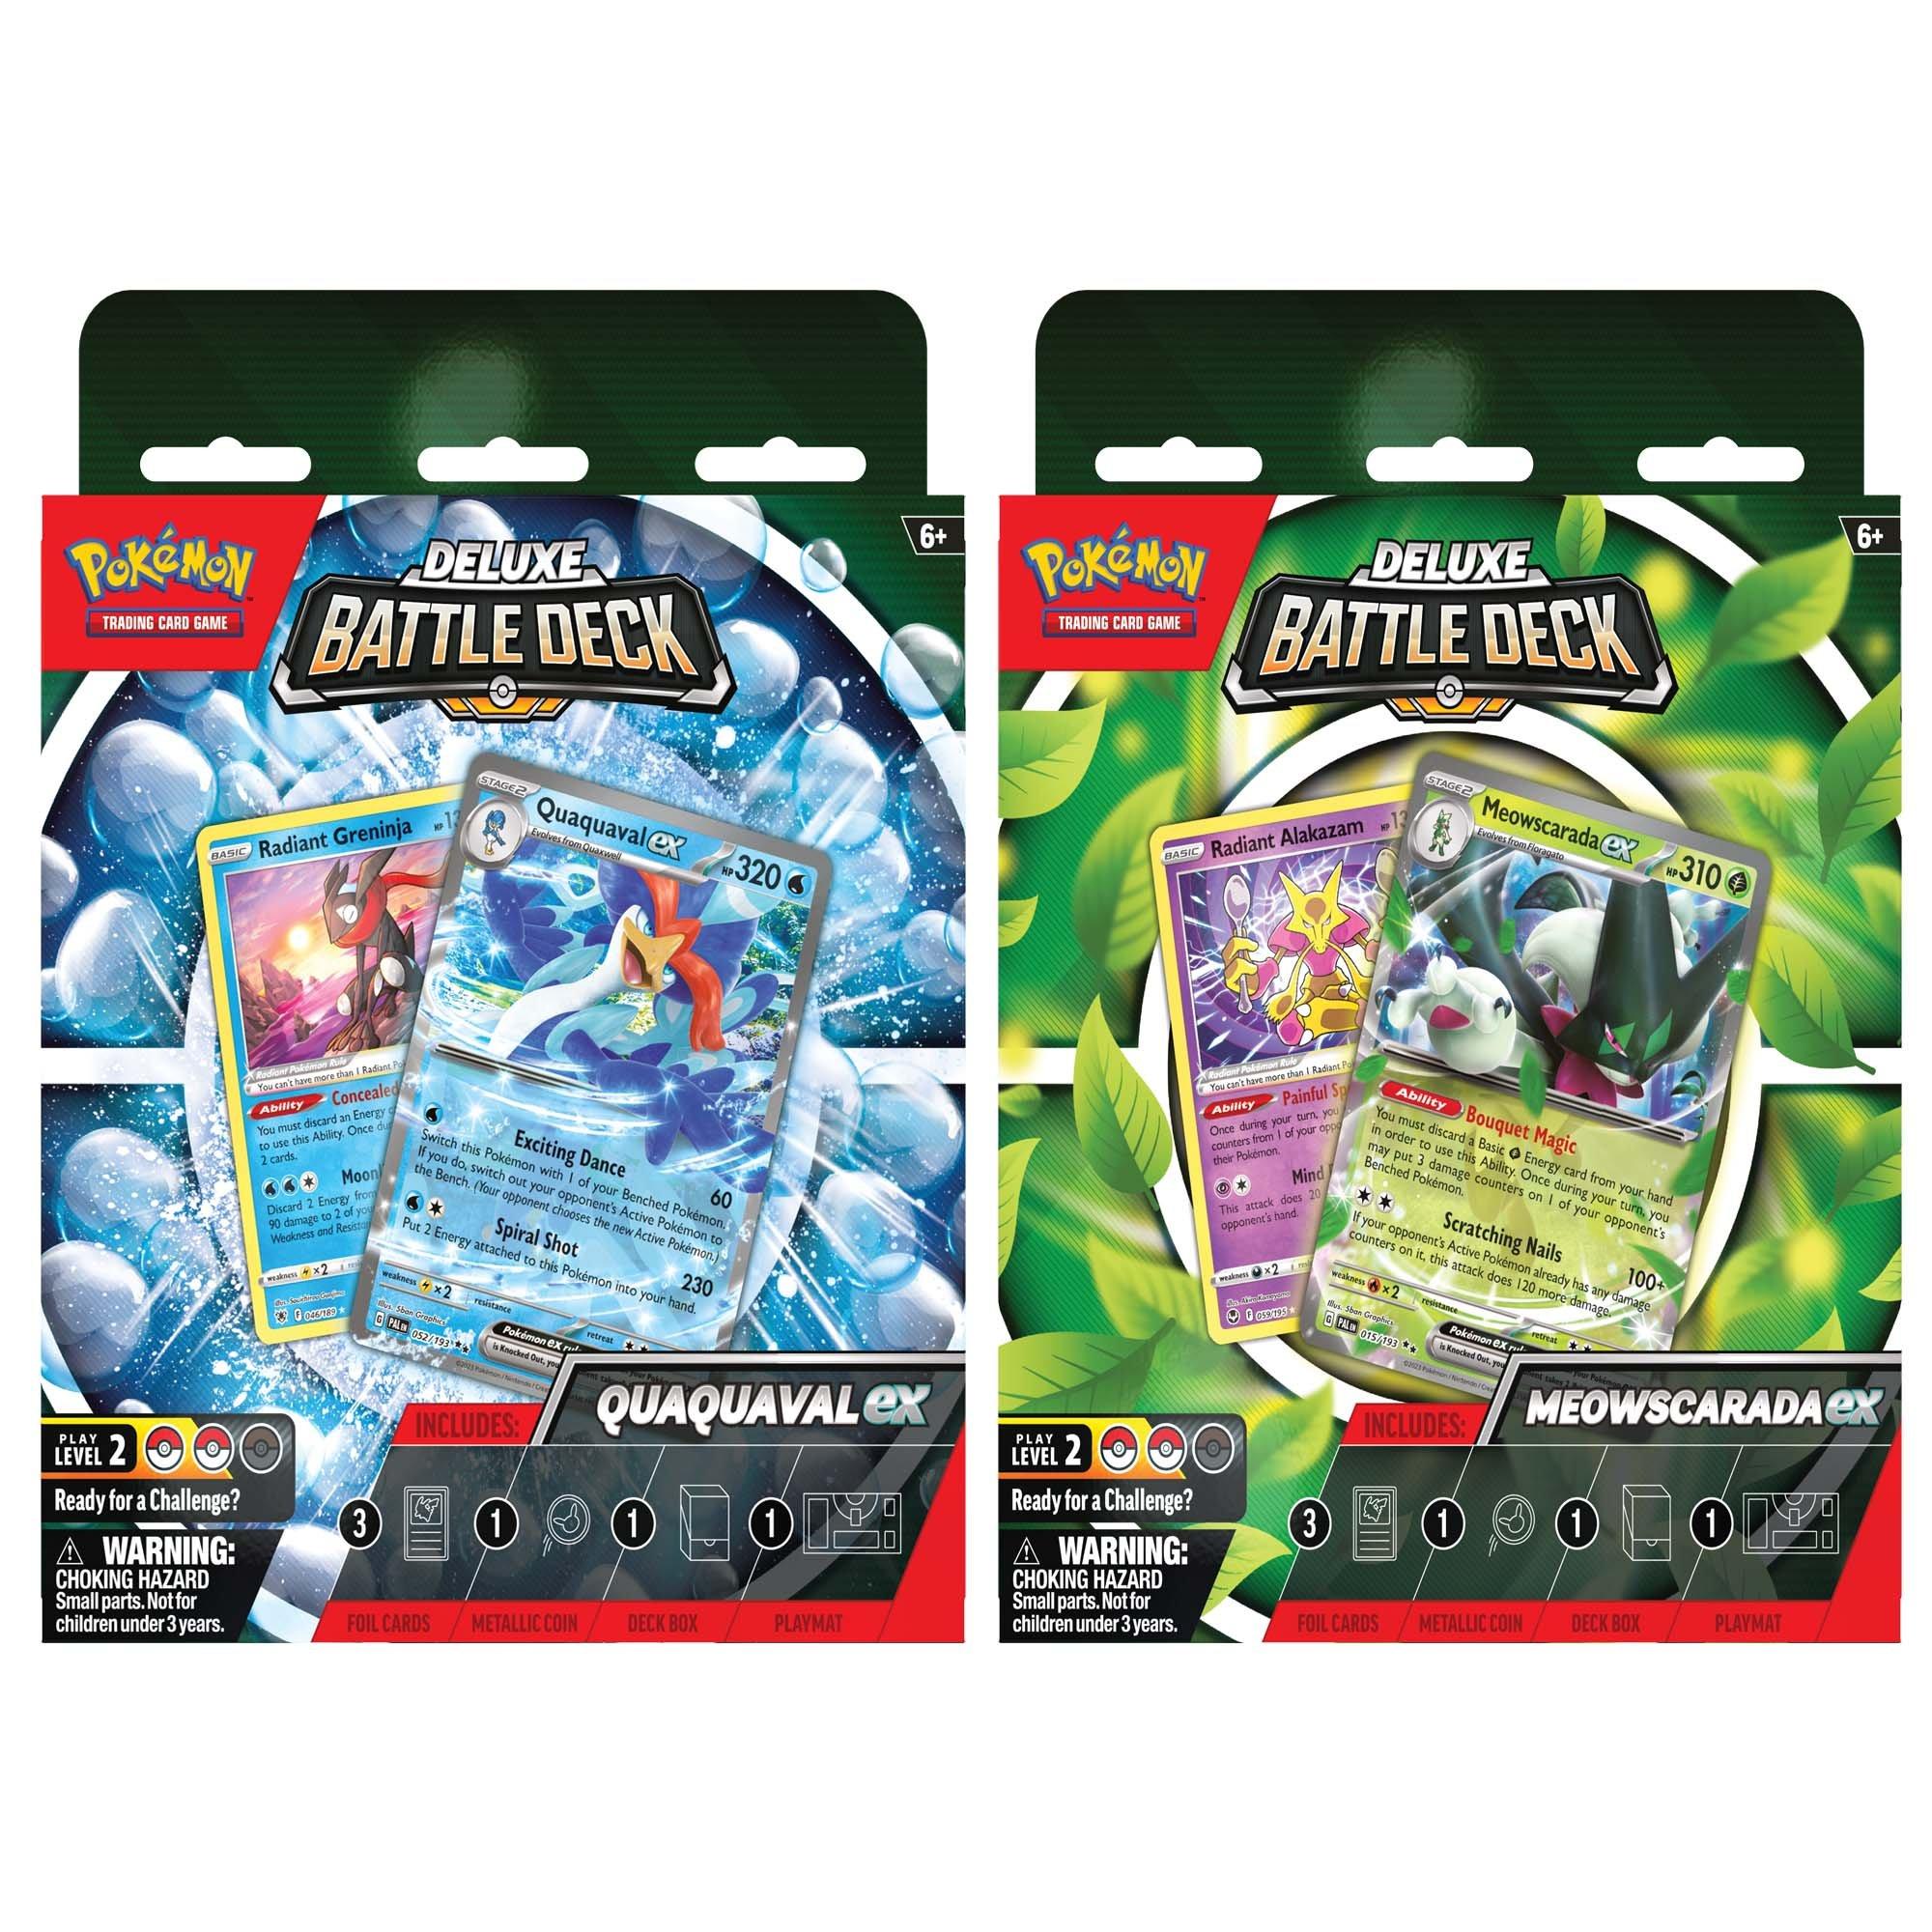 Betydelig Billy ged Villig Pokemon Trading Card Game: Meowscarada ex or Quaquaval ex Deluxe Battle  Deck (Styles May Vary) | GameStop